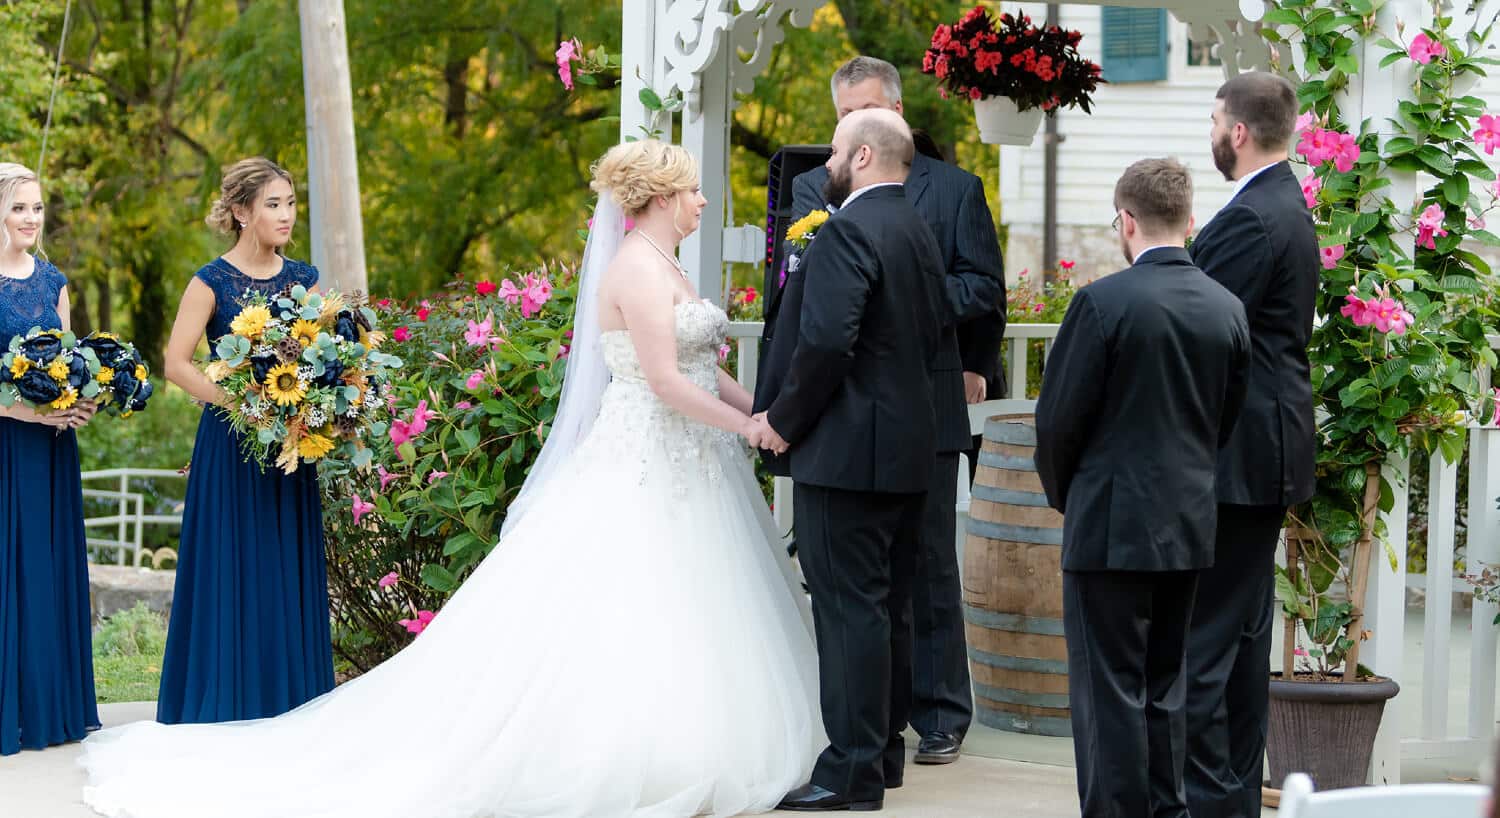 Close-up side view of bride and groom holding hands standing in front of minister with observing wedding party by white gazebo with hanging potted flowers.